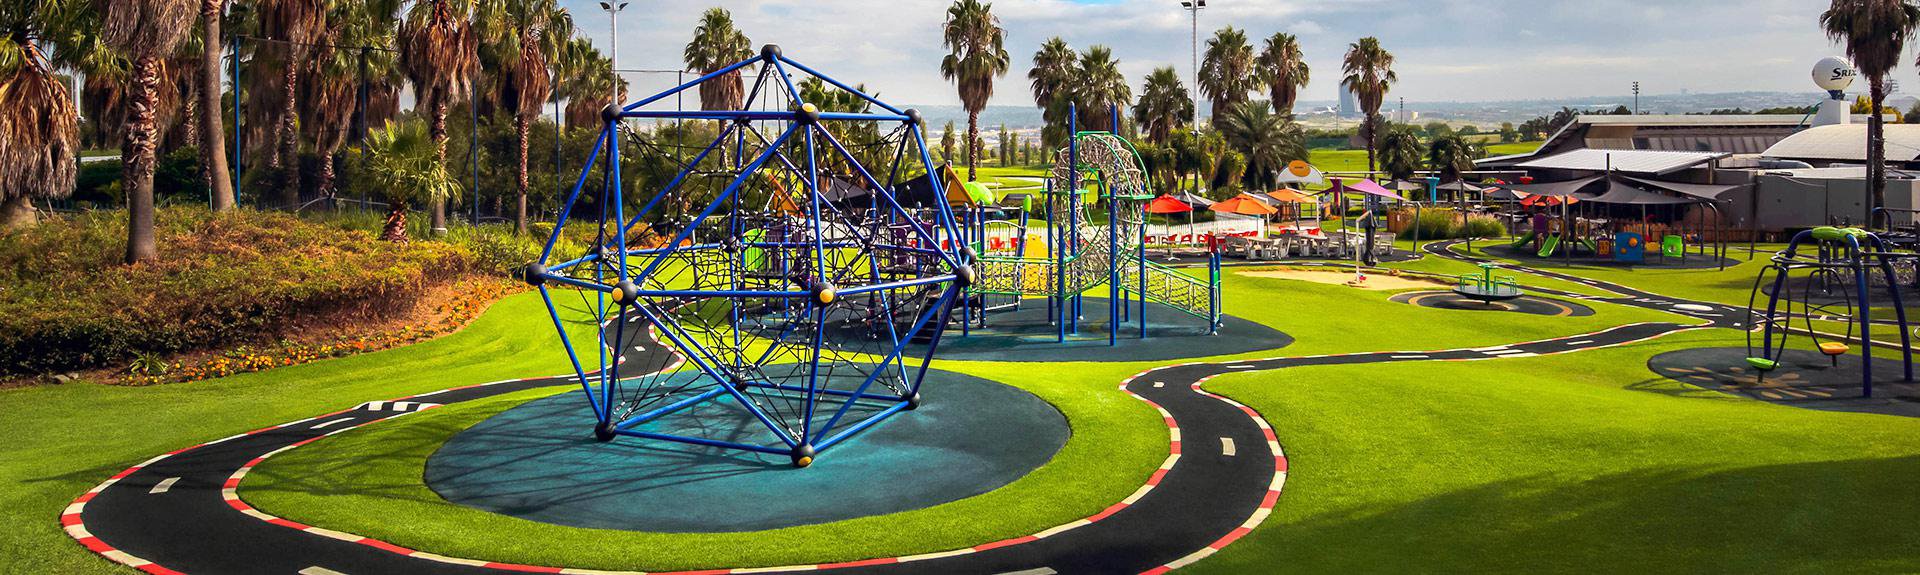 World of Golf | Johannesburg | Active Activities | Kids Party Venue | Party ideas for boys and girls